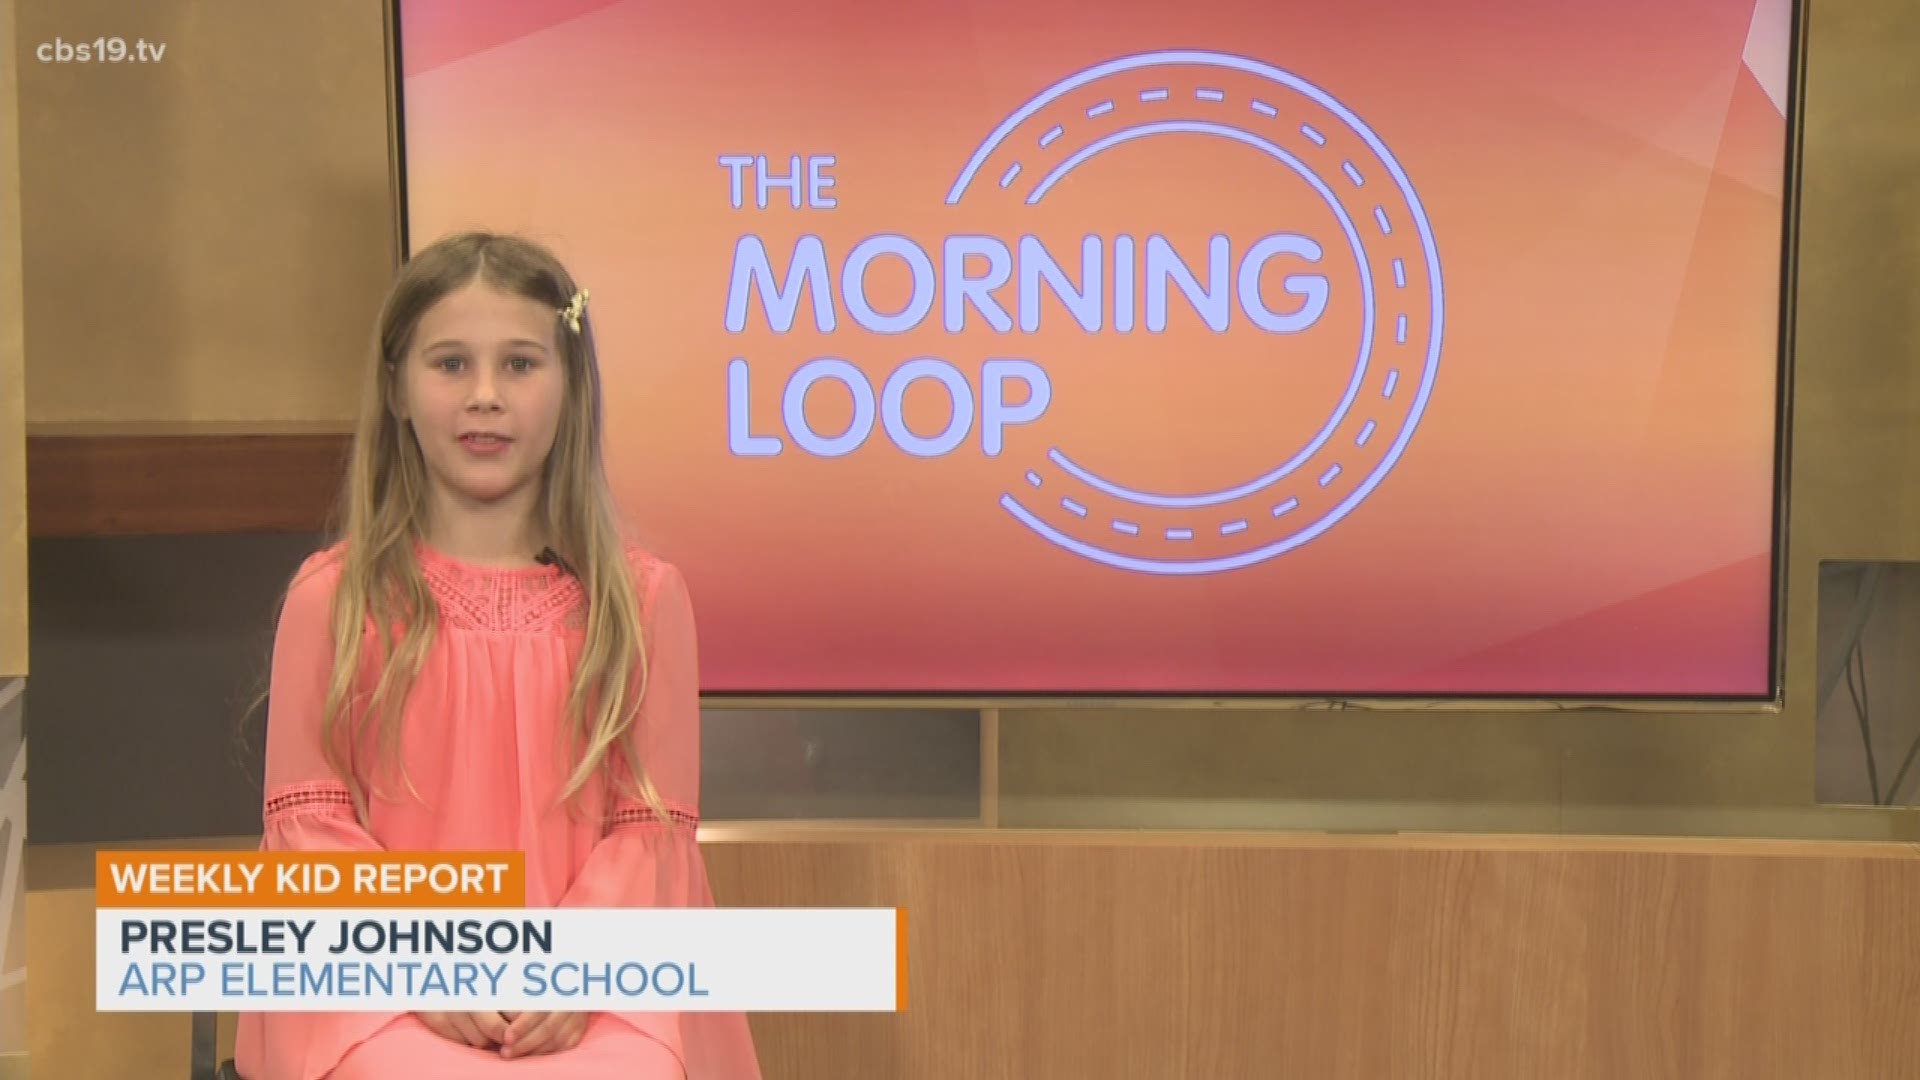 Presley Johnson stopped by our studios this morning to give this week's Kid Report. Presley is a fourth grader at Arp Elementary. She's involved in UIL at school and takes private violin lessons. She also performs in God's Kids at Colonial Hills Baptist C